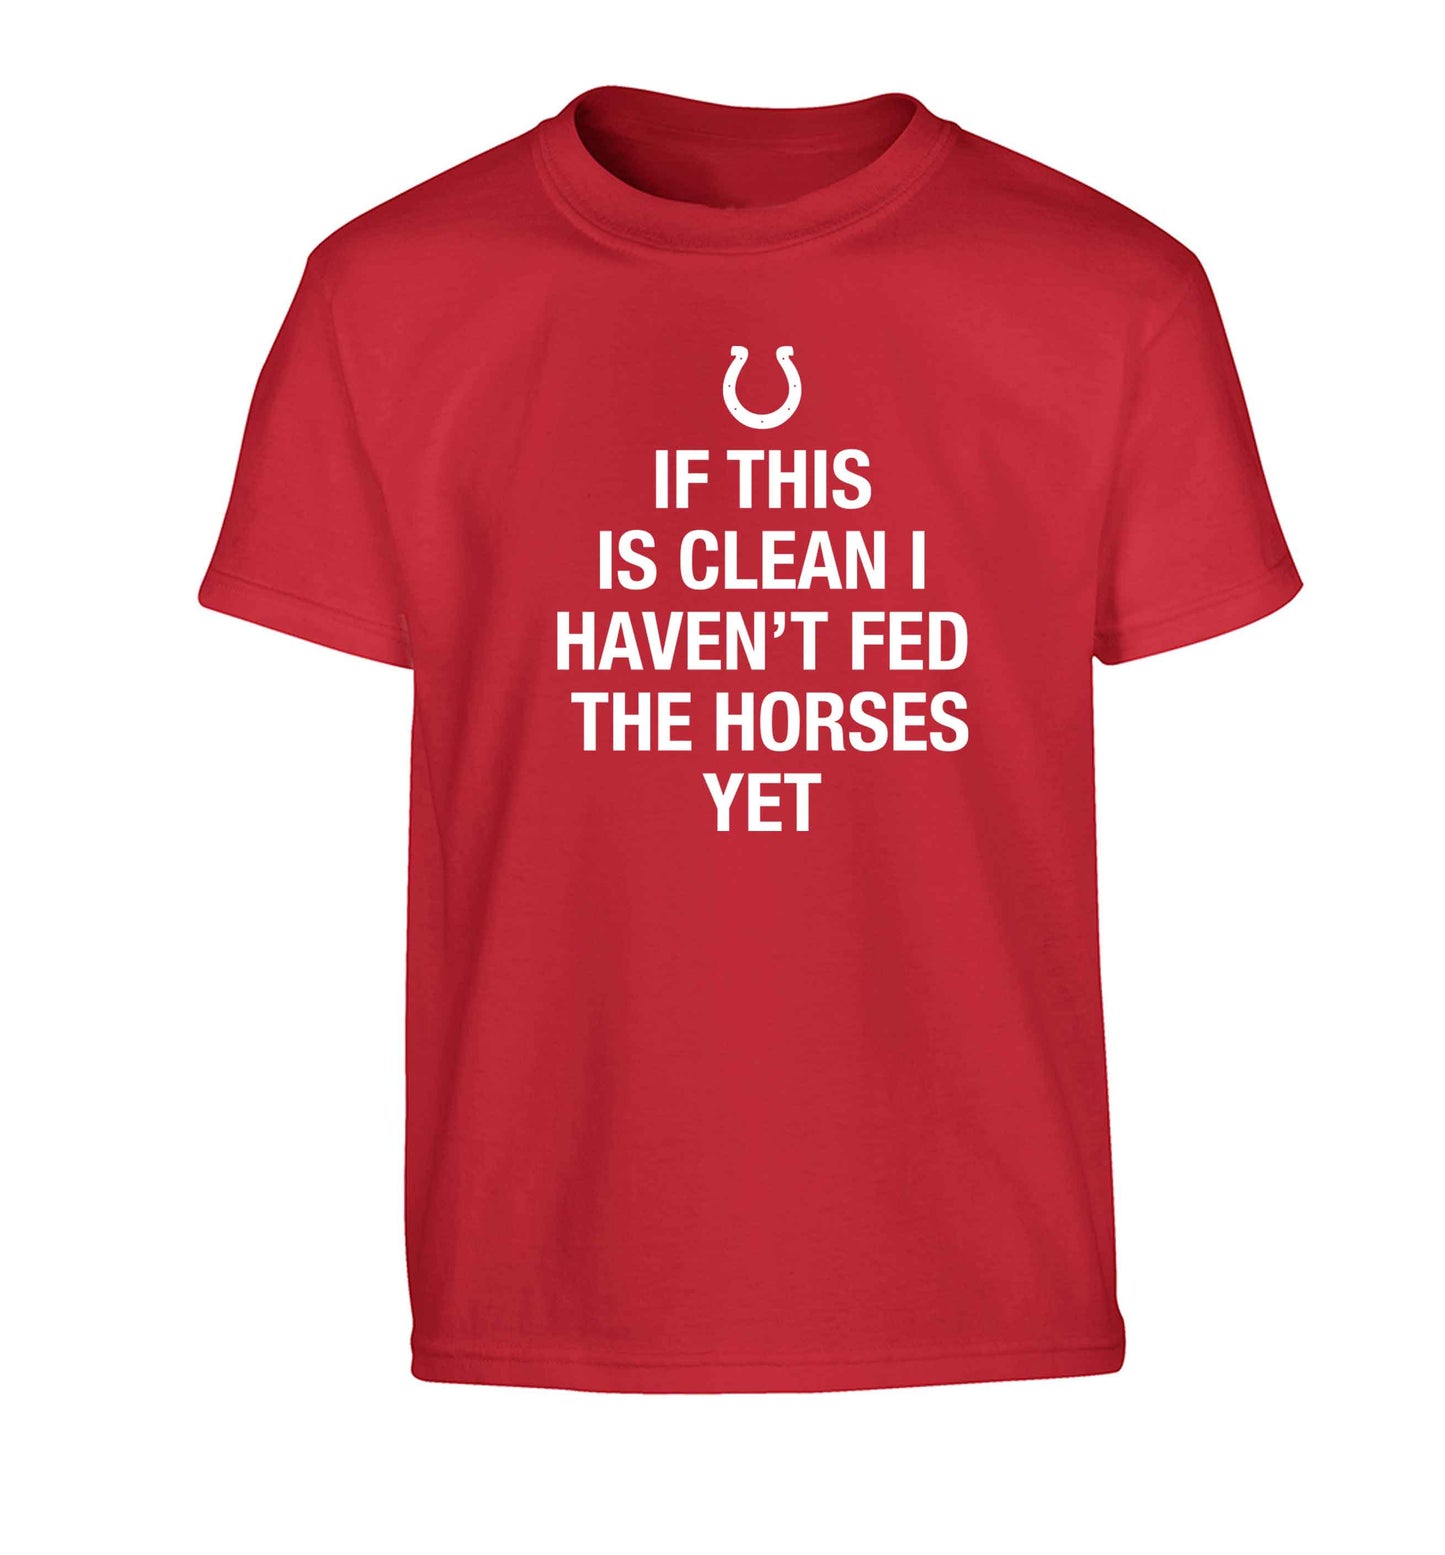 If this isn't clean I haven't fed the horses yet Children's red Tshirt 12-13 Years